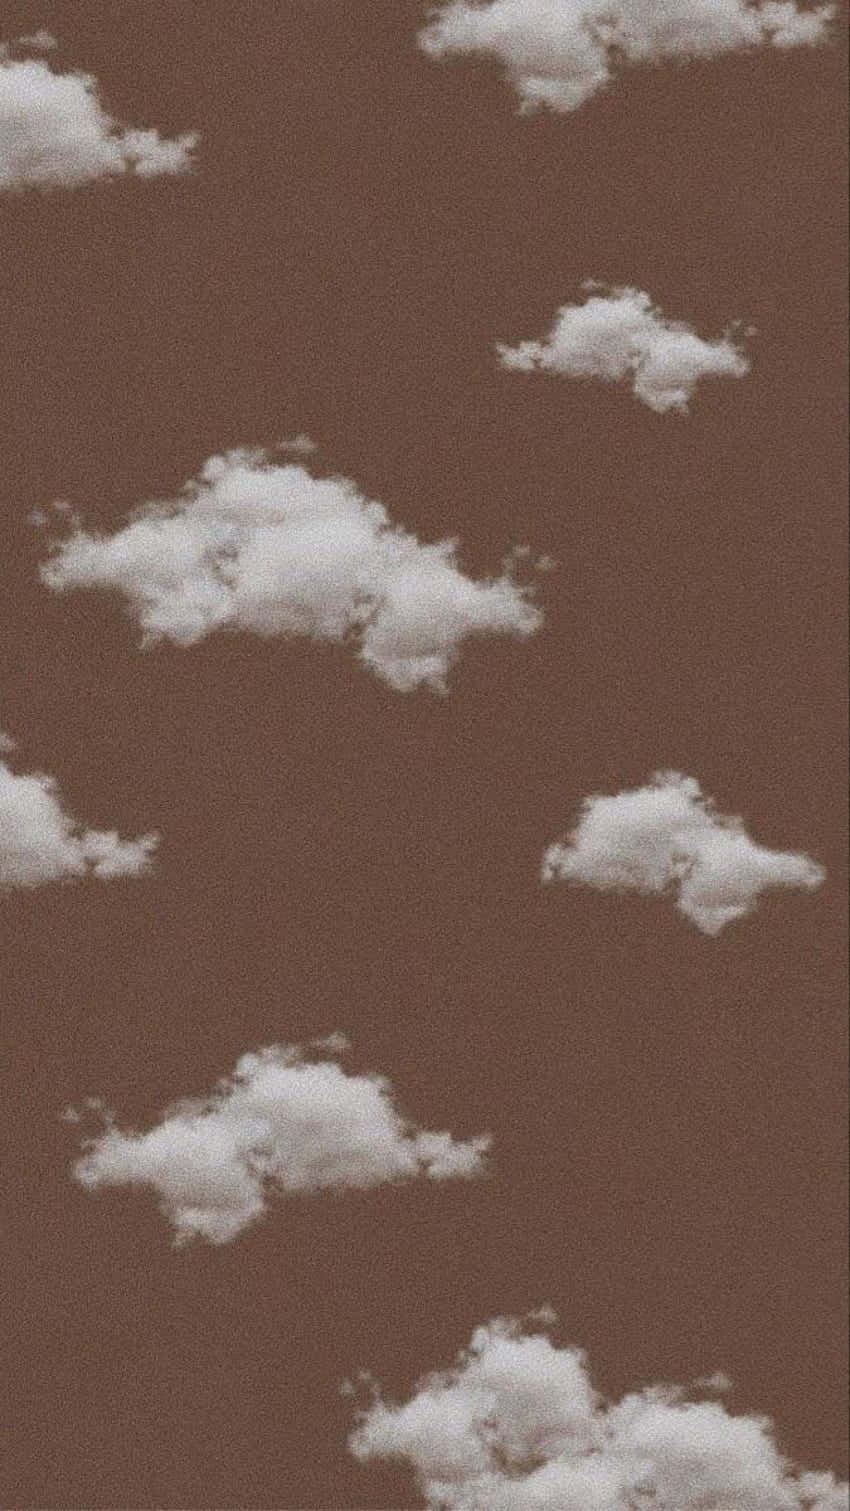 A Brown And White Wallpaper With Clouds On It